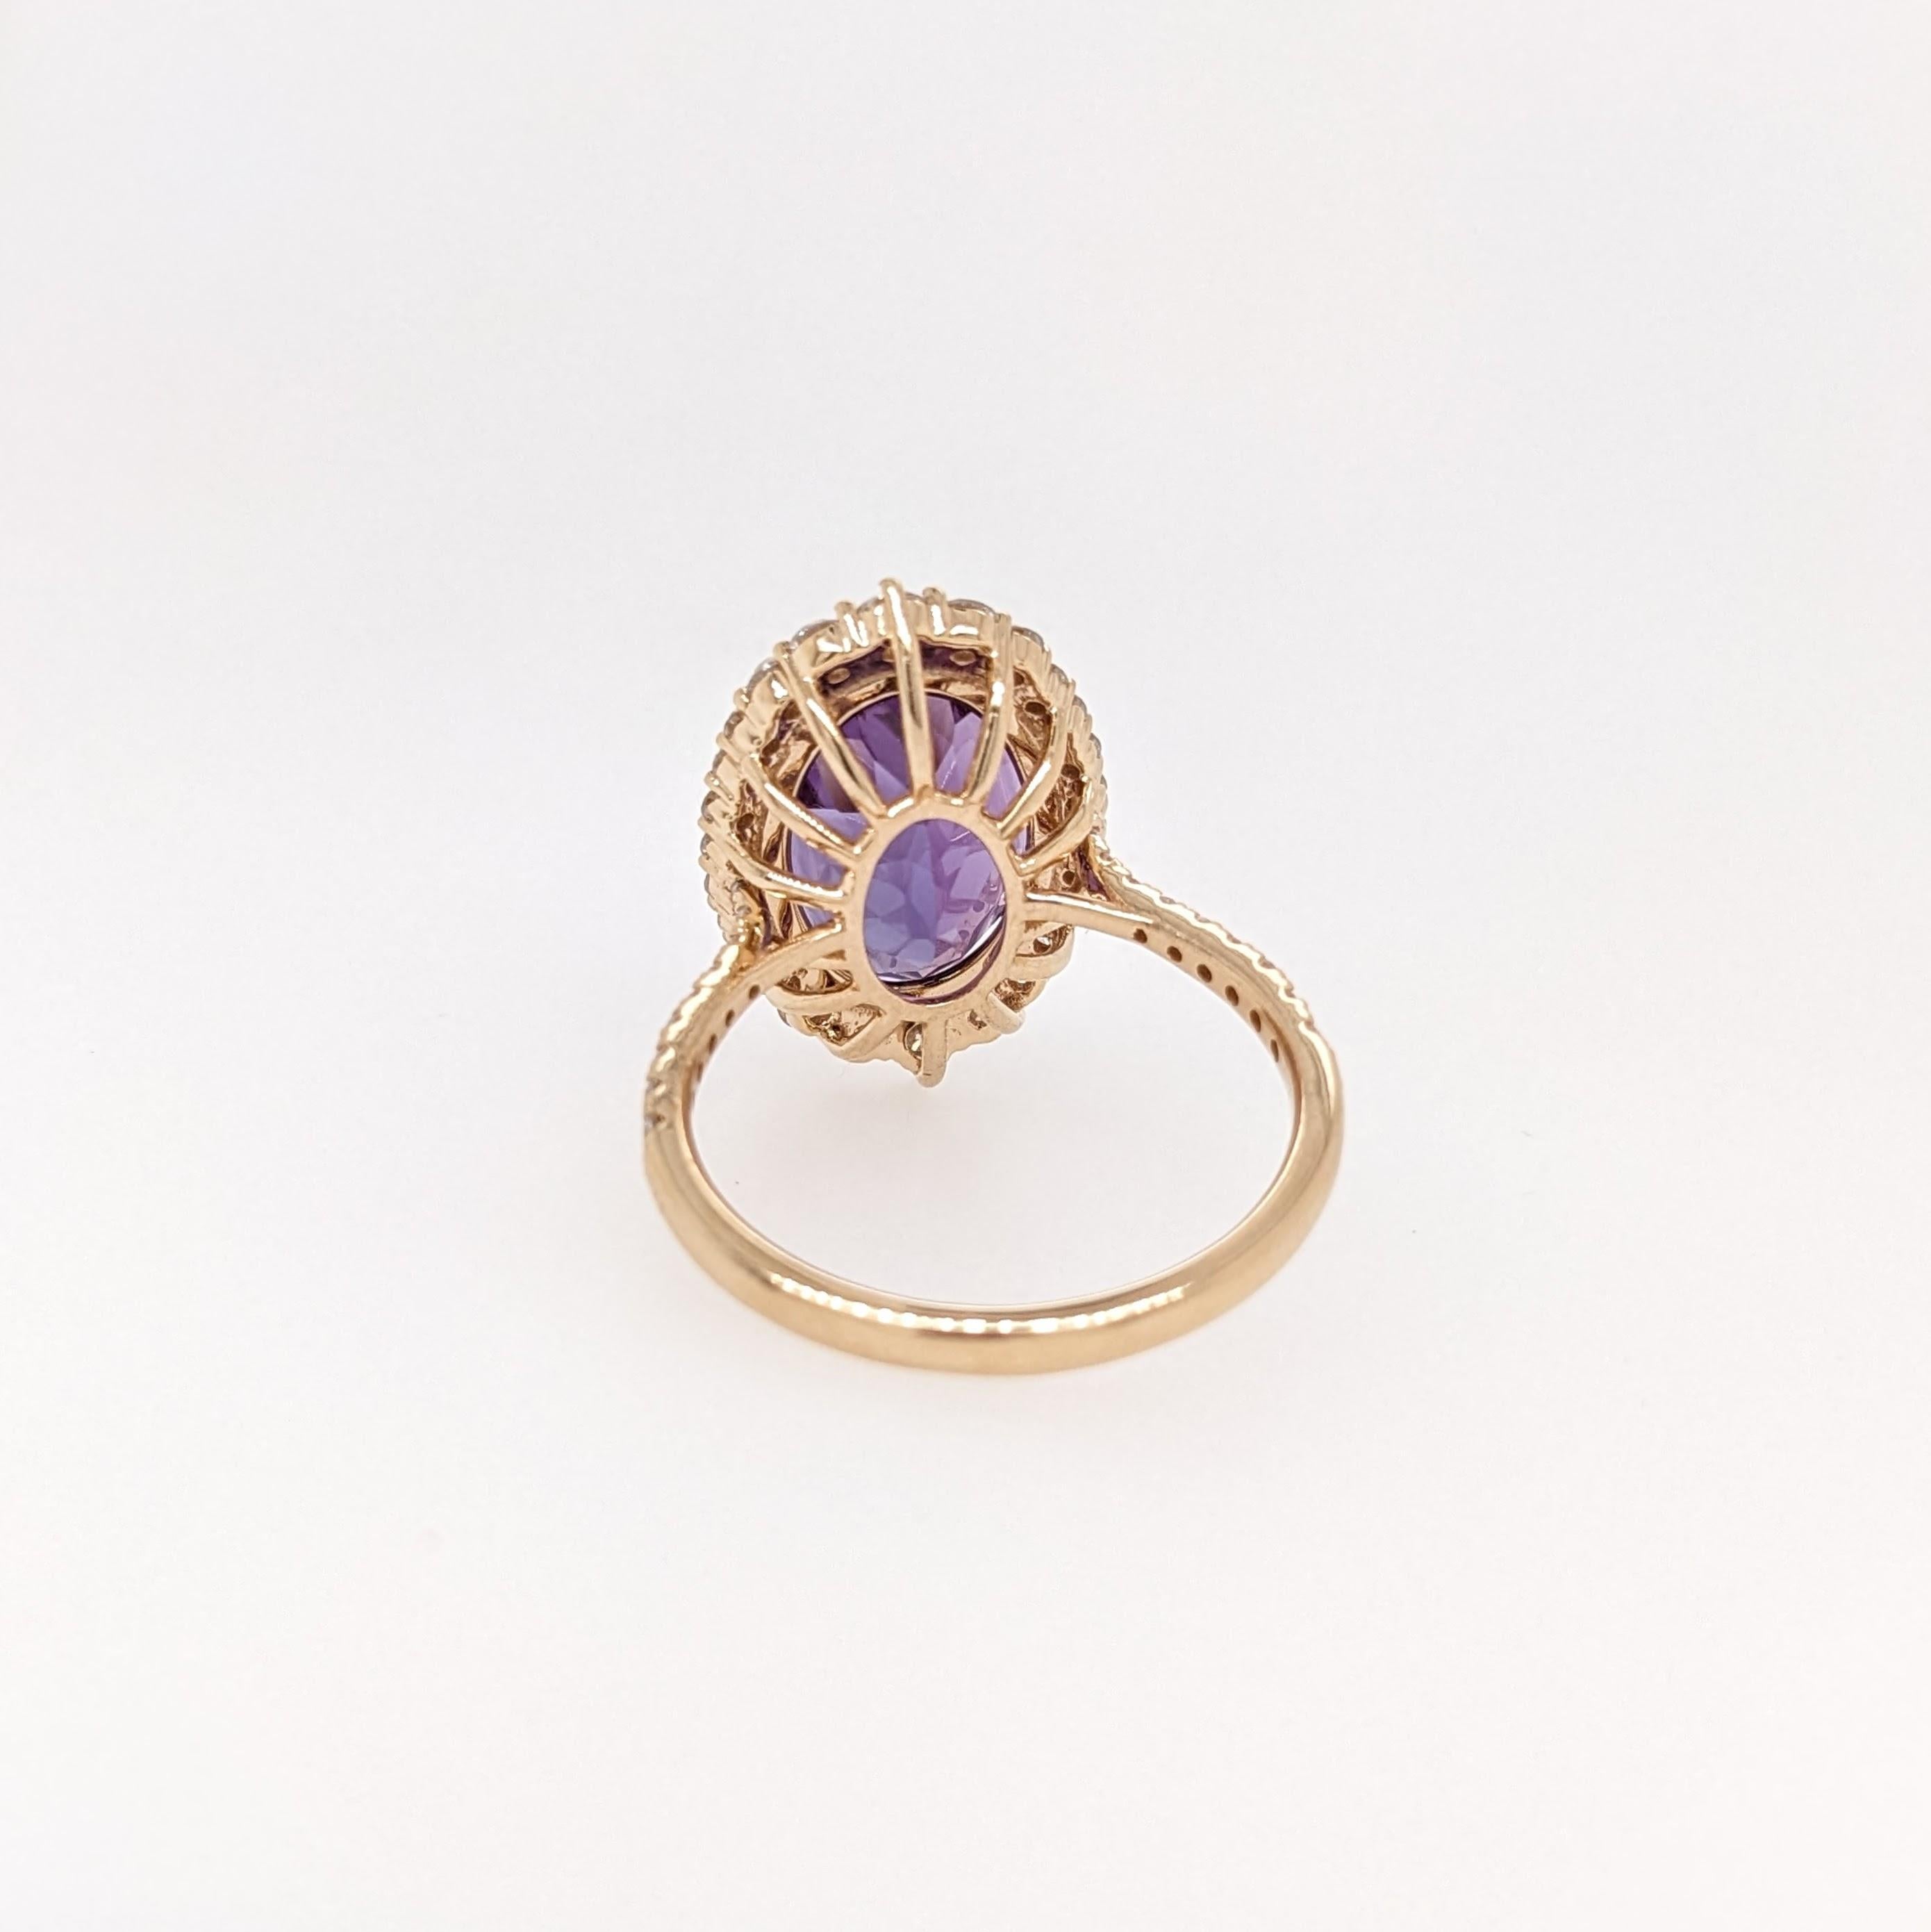 This statement ring features a 5.77 carat oval Amethyst gemstone with natural earth mined diamonds, all set in solid 14K gold. This ring can be a beautiful February birthstone gift for your loved ones! 

Specifications

Item Type: Ring
Center Stone: